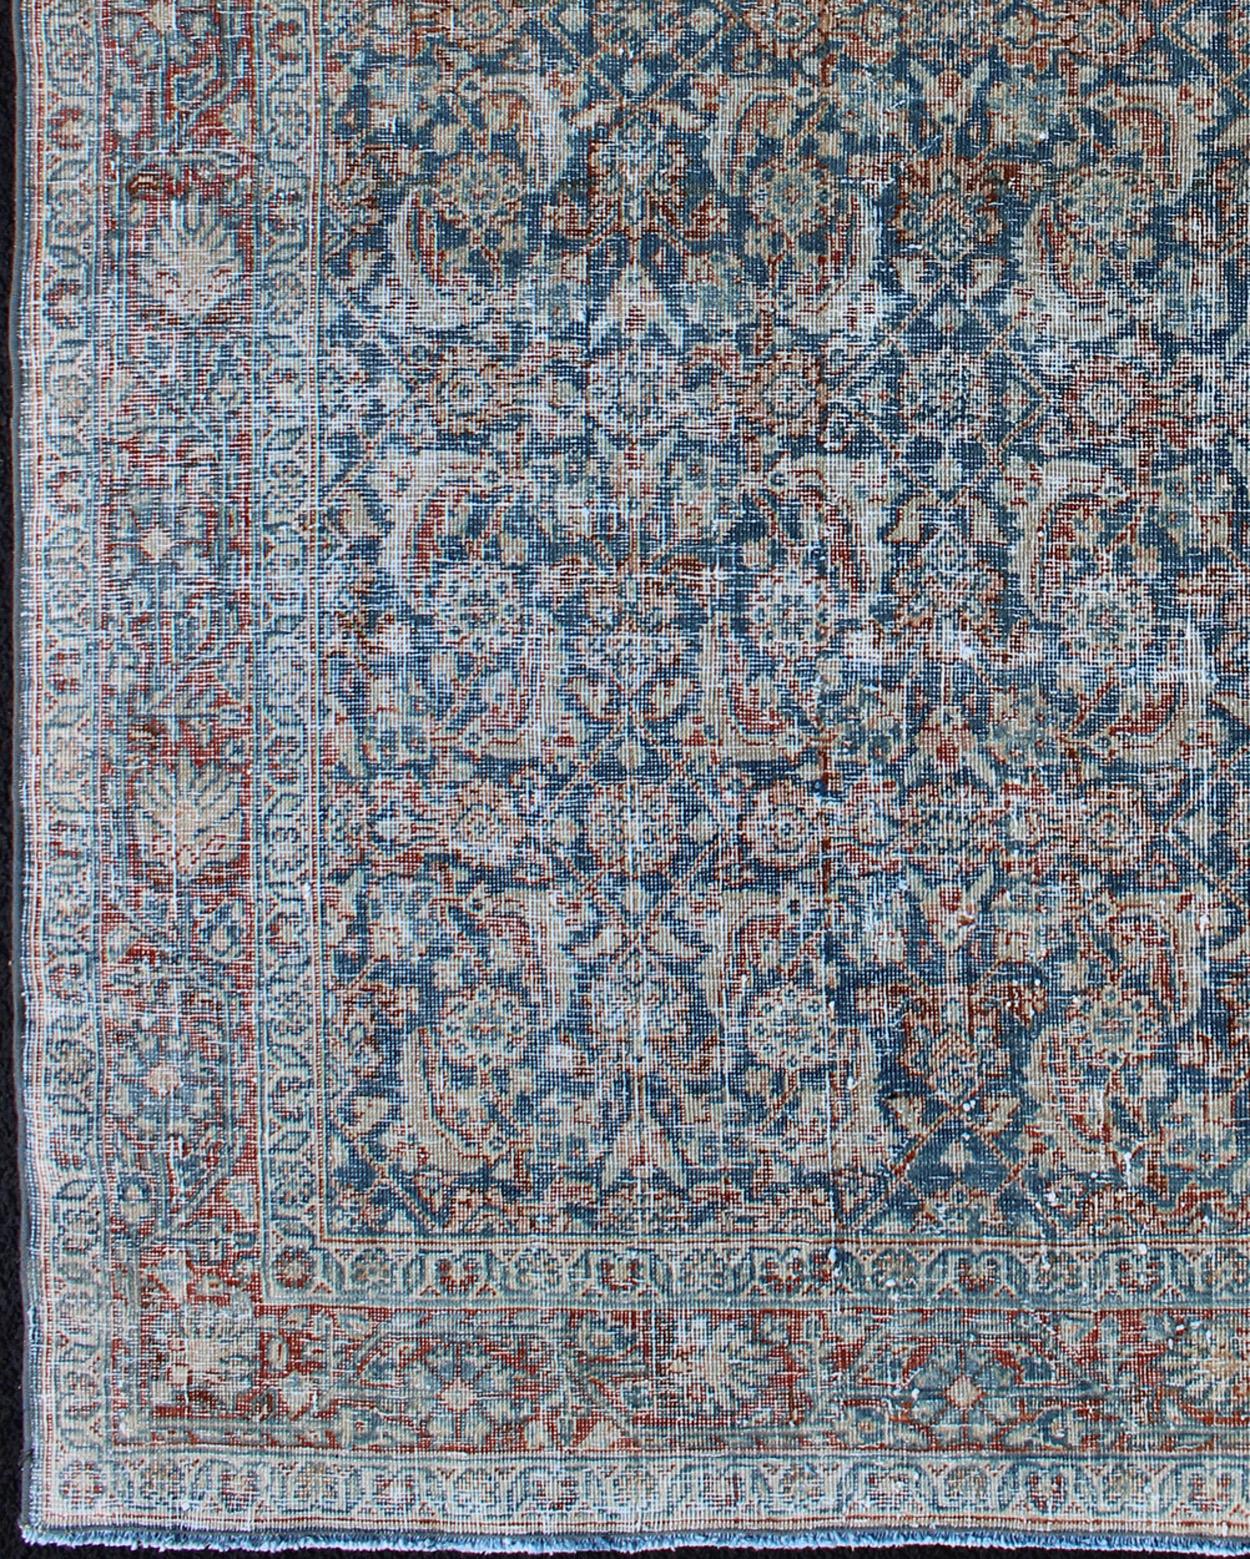 Mahal rug antique Persian with floral design in red, blue, ivory, cream tones, rug ema-7548, country of origin / type: Iran / Mahal, circa 1920

This antique Persian Mahal rug, circa early 20th century, relies heavily on exquisite details as well as